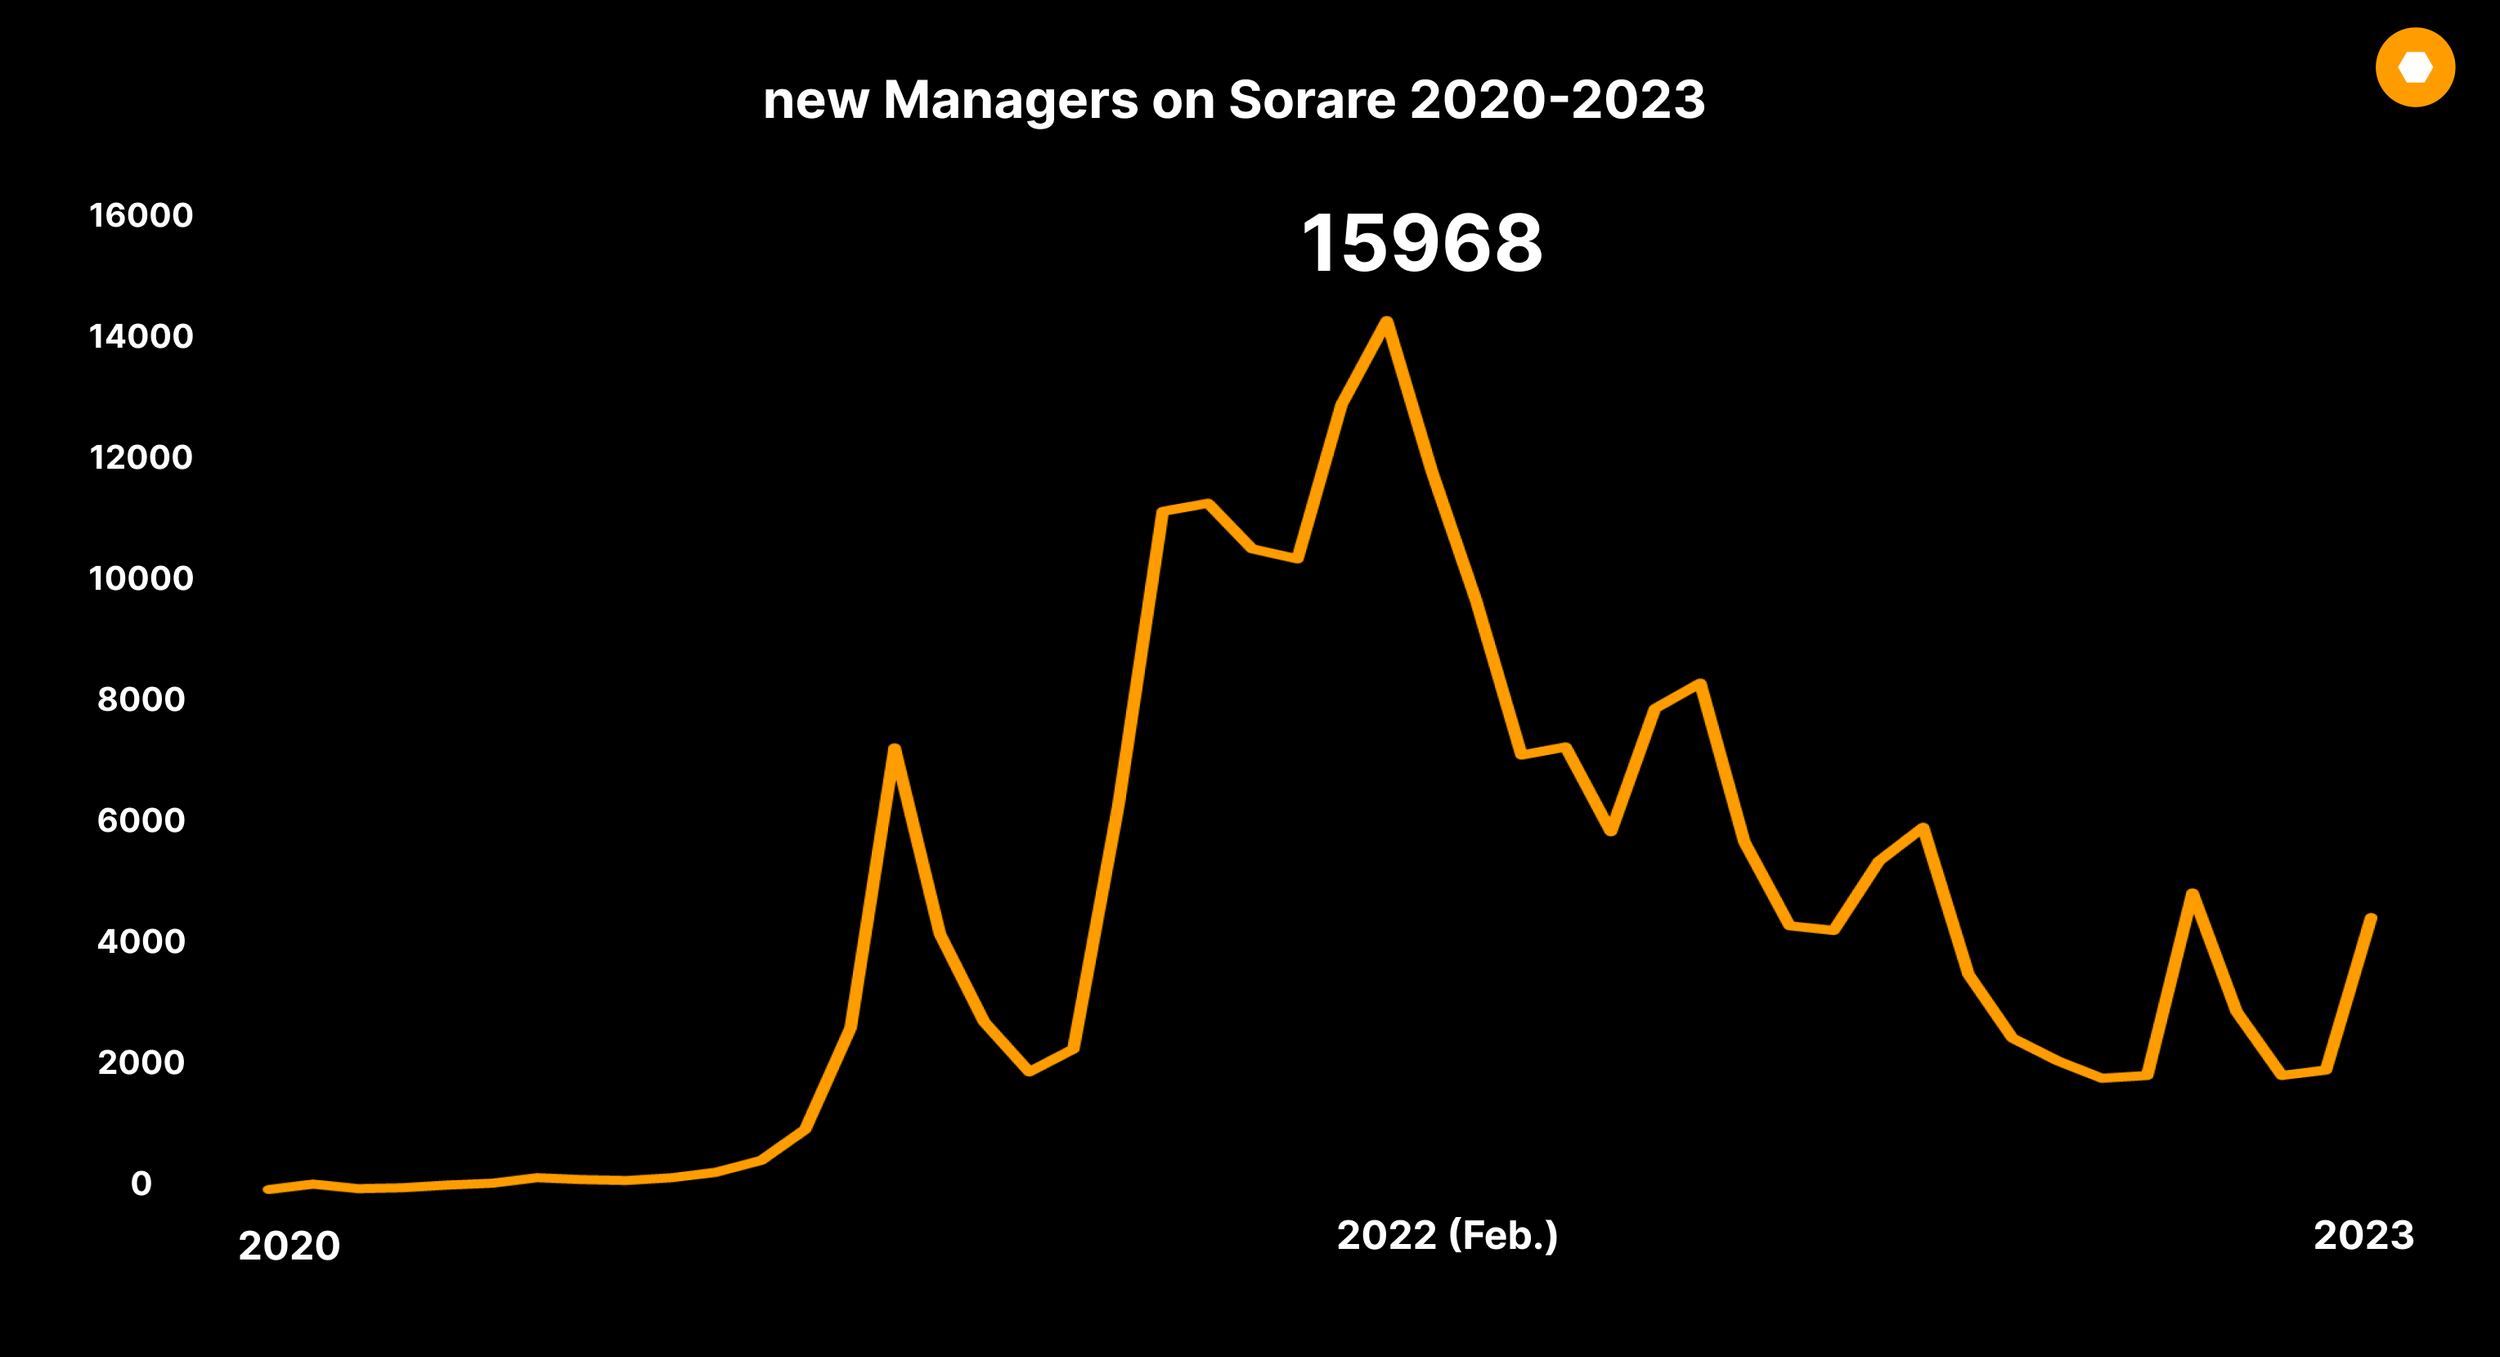 Sorare Managers 2020 - 2023